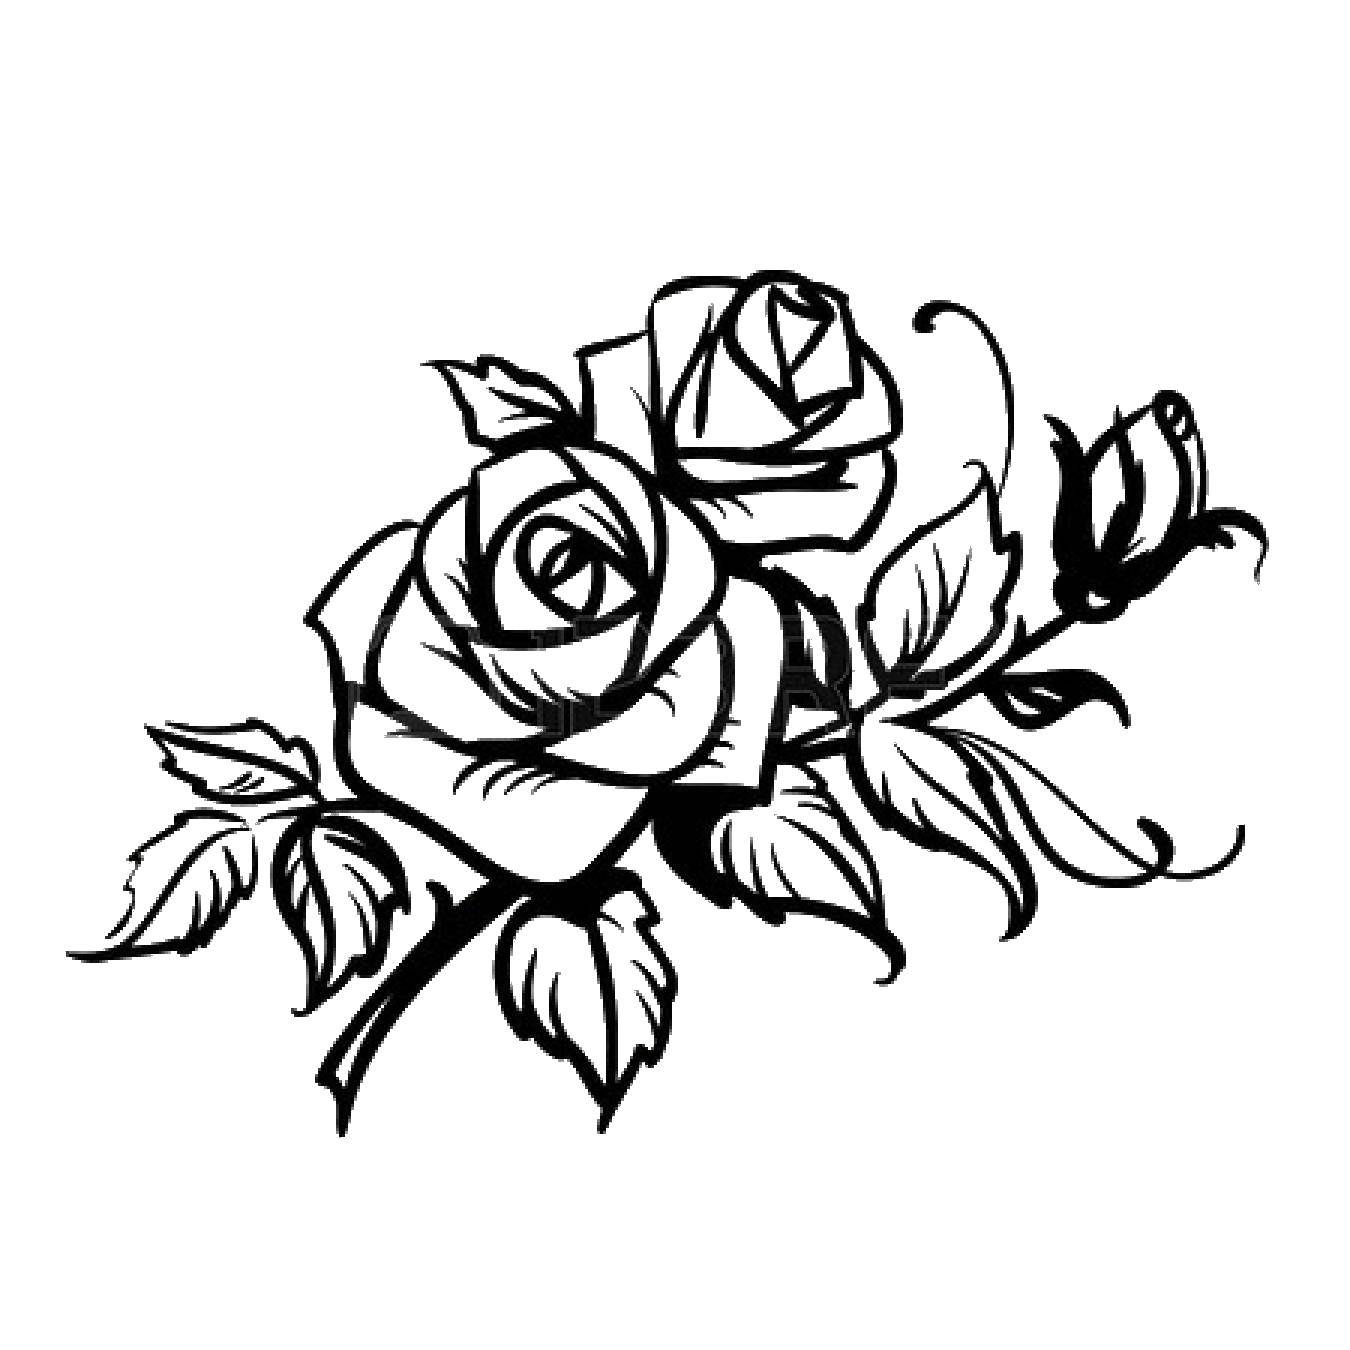 Coloring Branch with roses. Category flowers. Tags:  rose, branch, leaves.